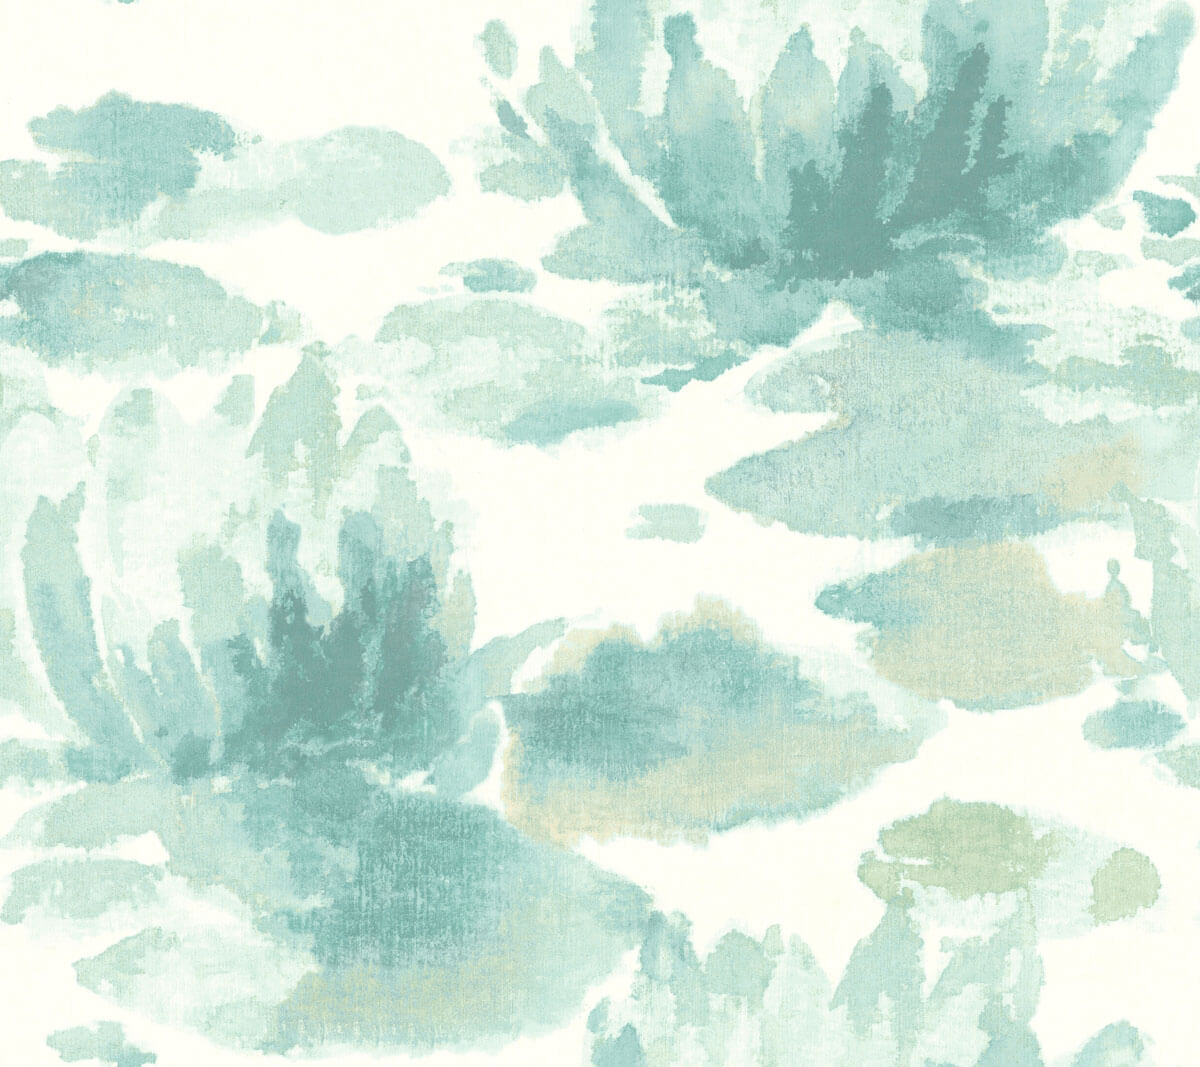 Candice Olson Botanical Dreams Water Lily Wallpaper - Blue